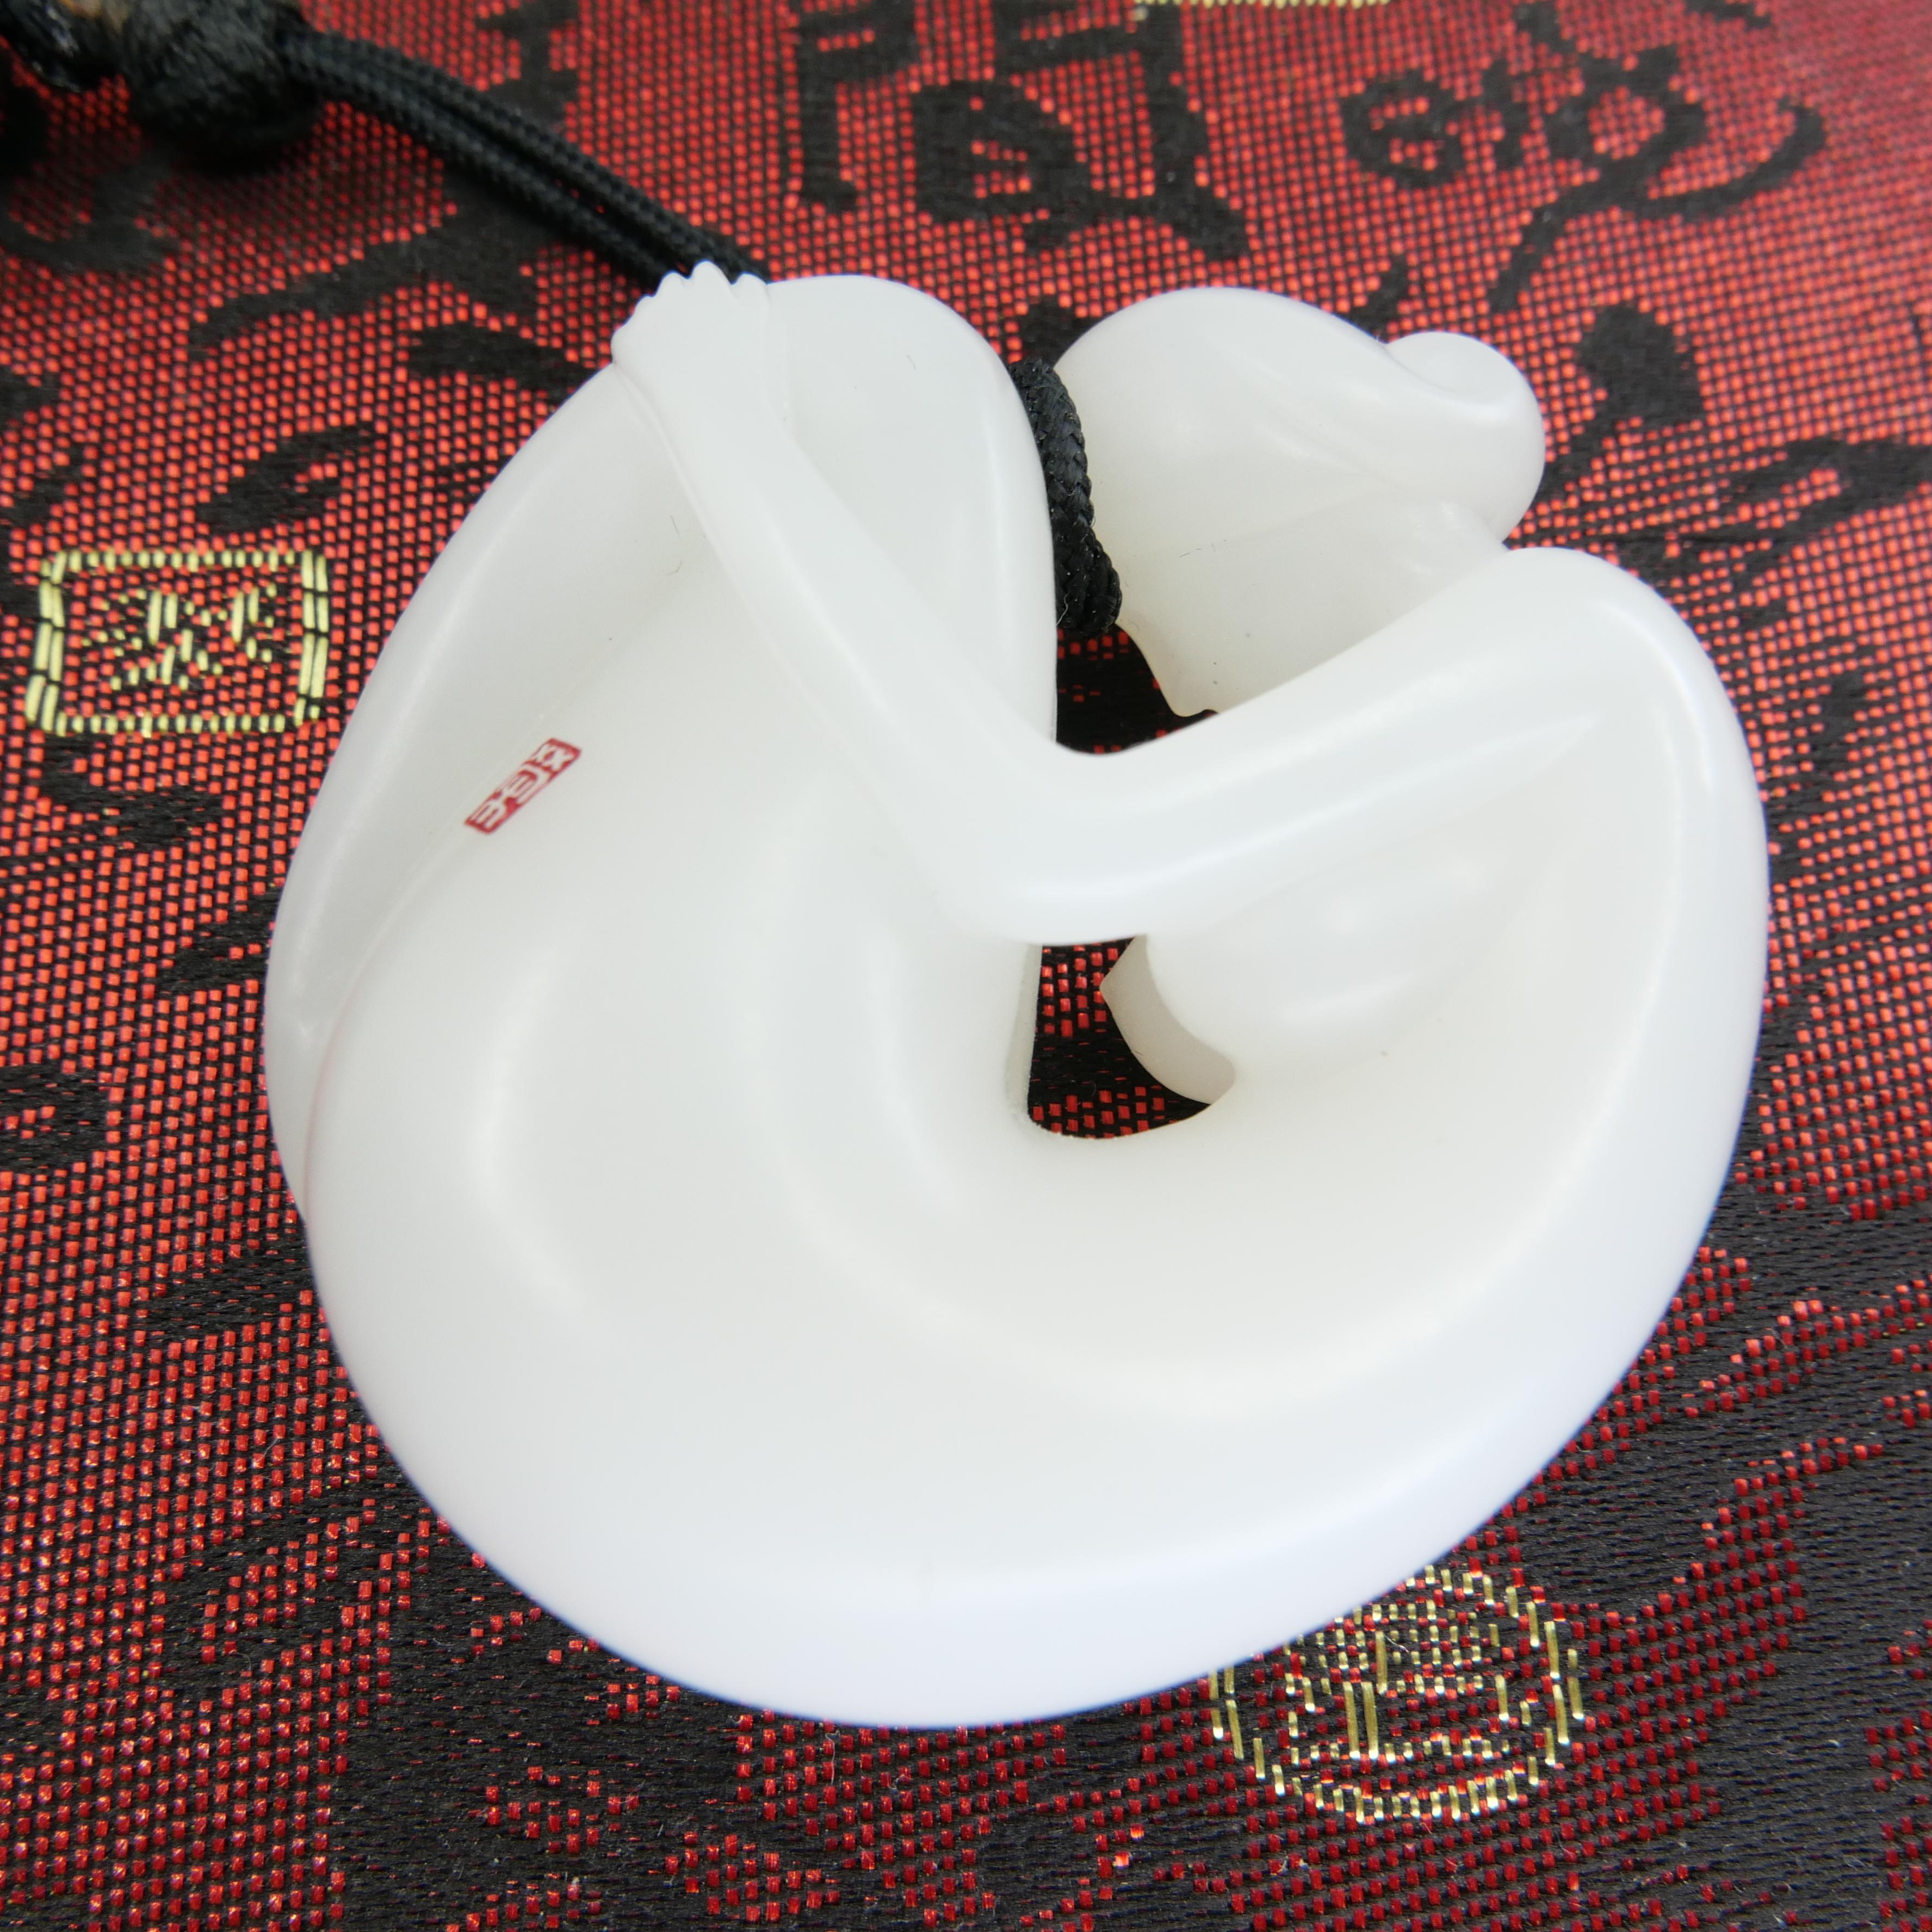 True Mutton Fat White Jade Certified Natural Nephrite Jade Carved by Master 于士榮. For Sale 3